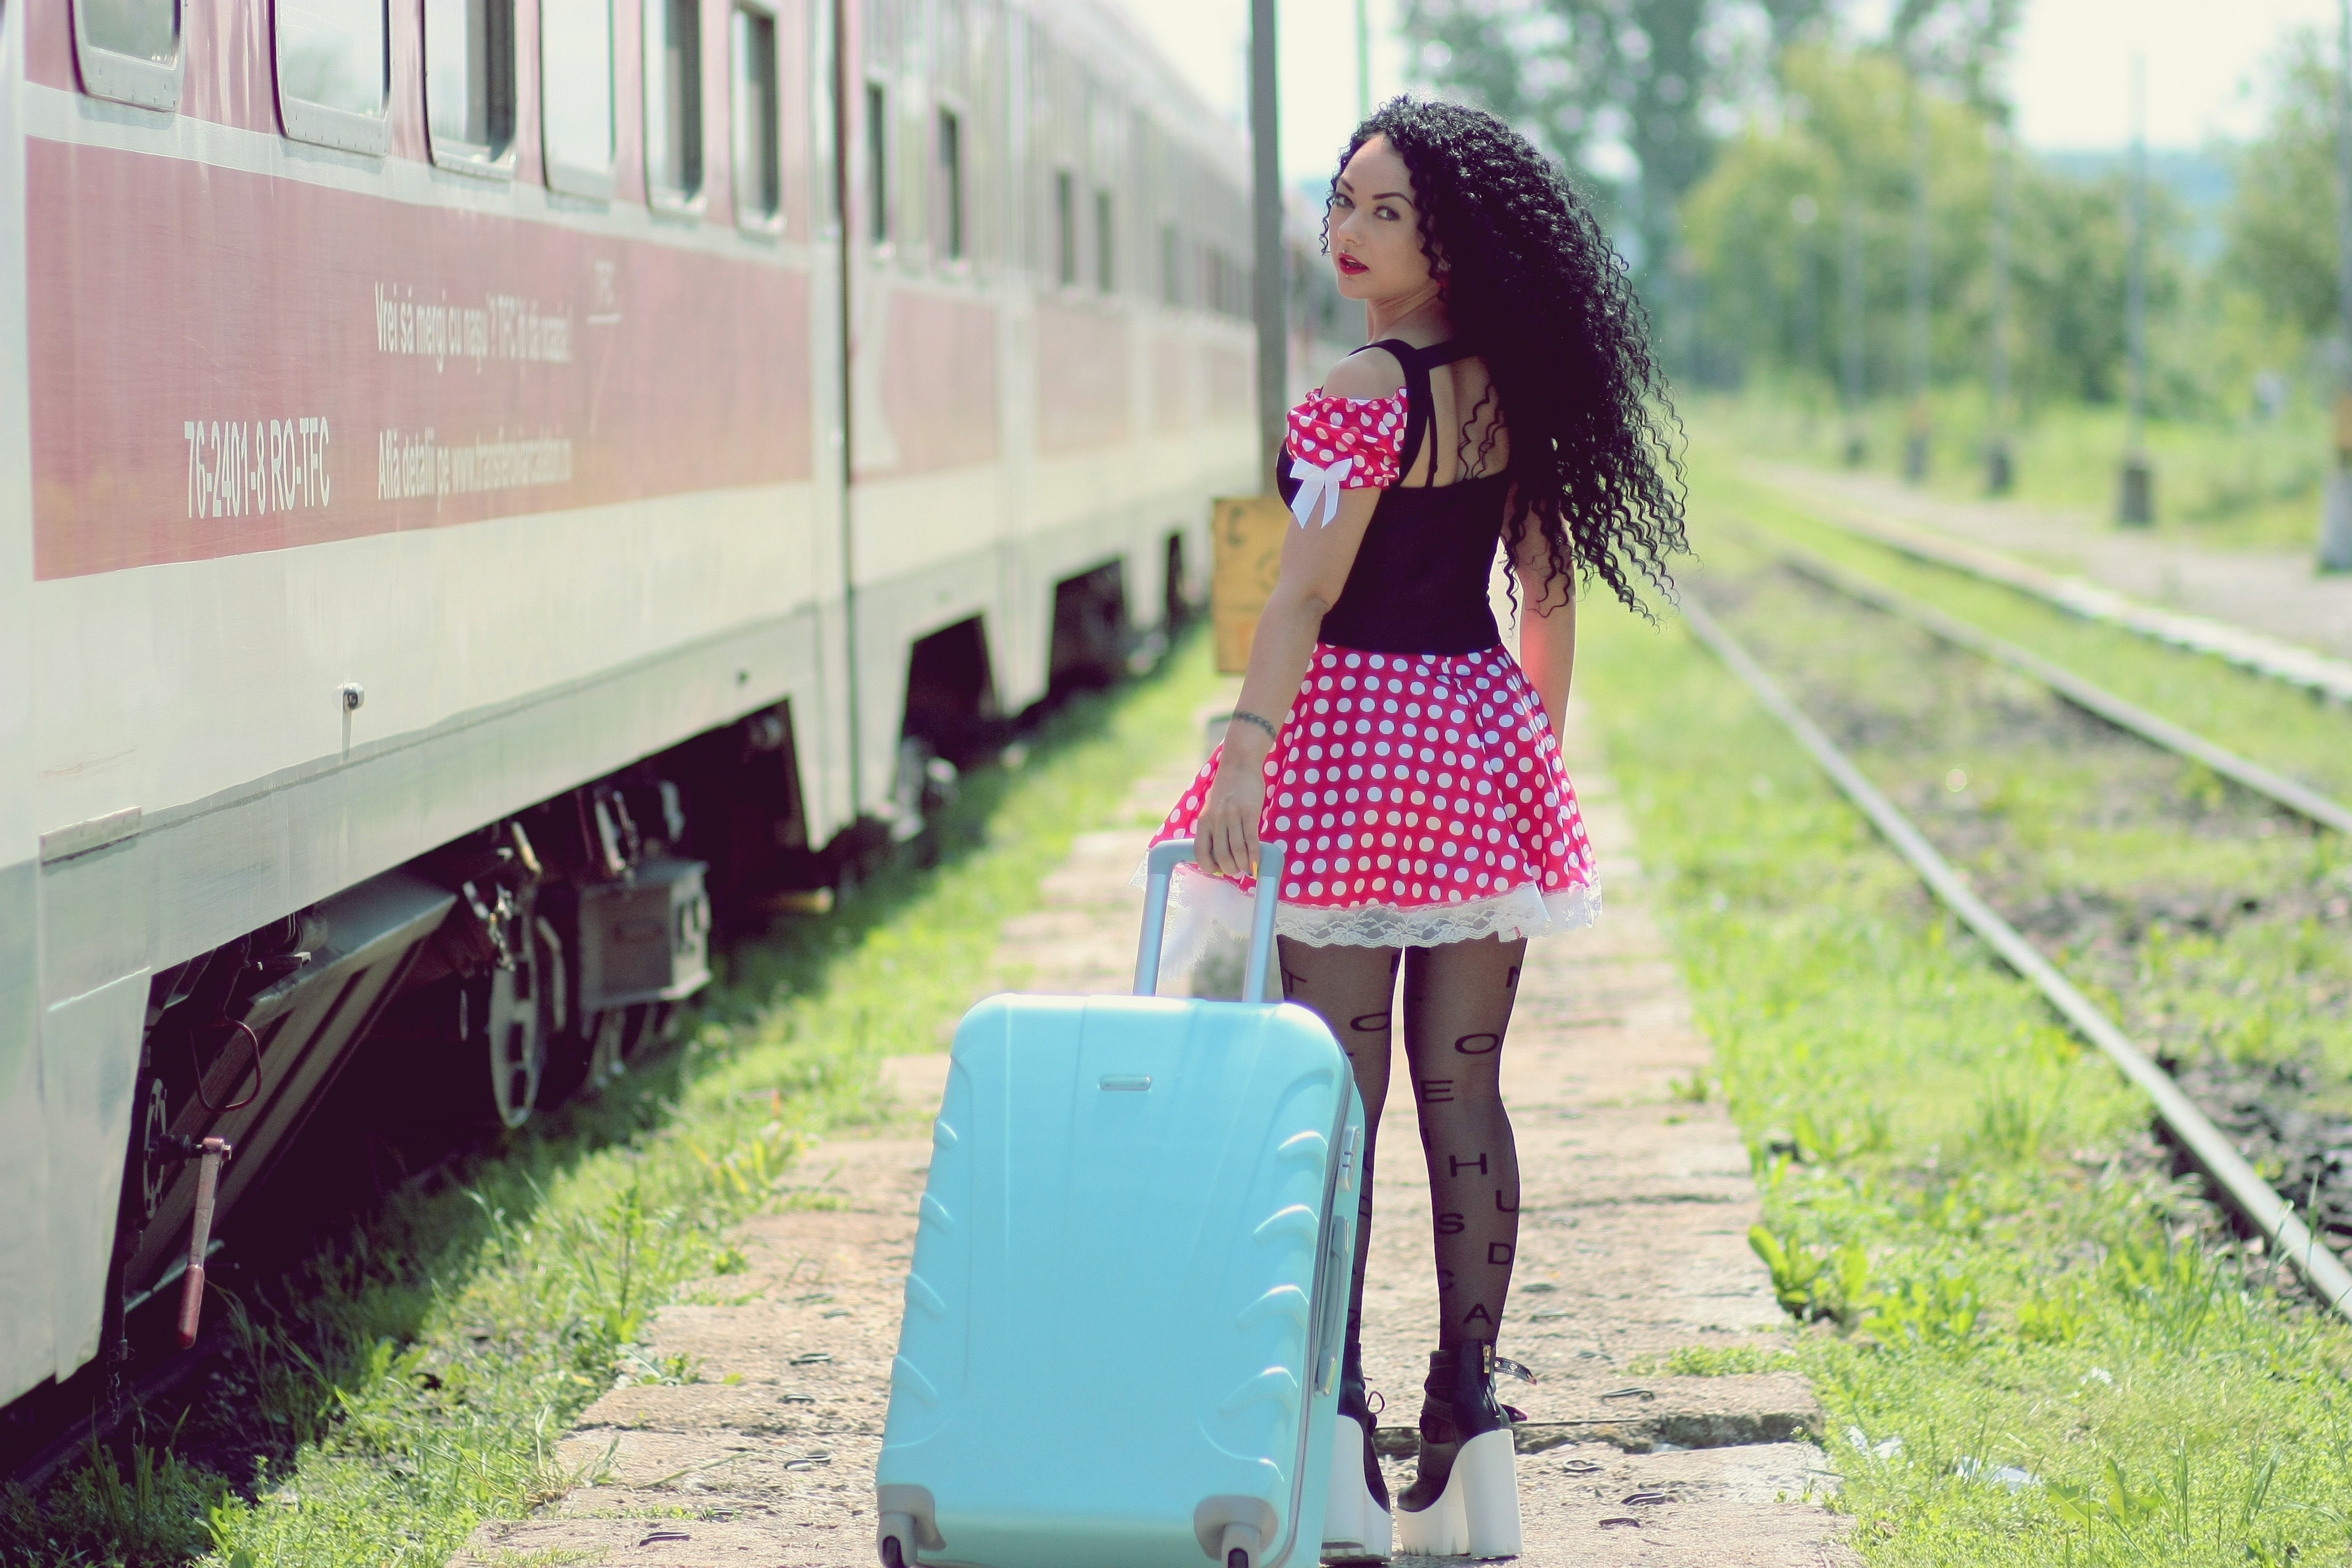 Young woman with luggage standing on train in city photo